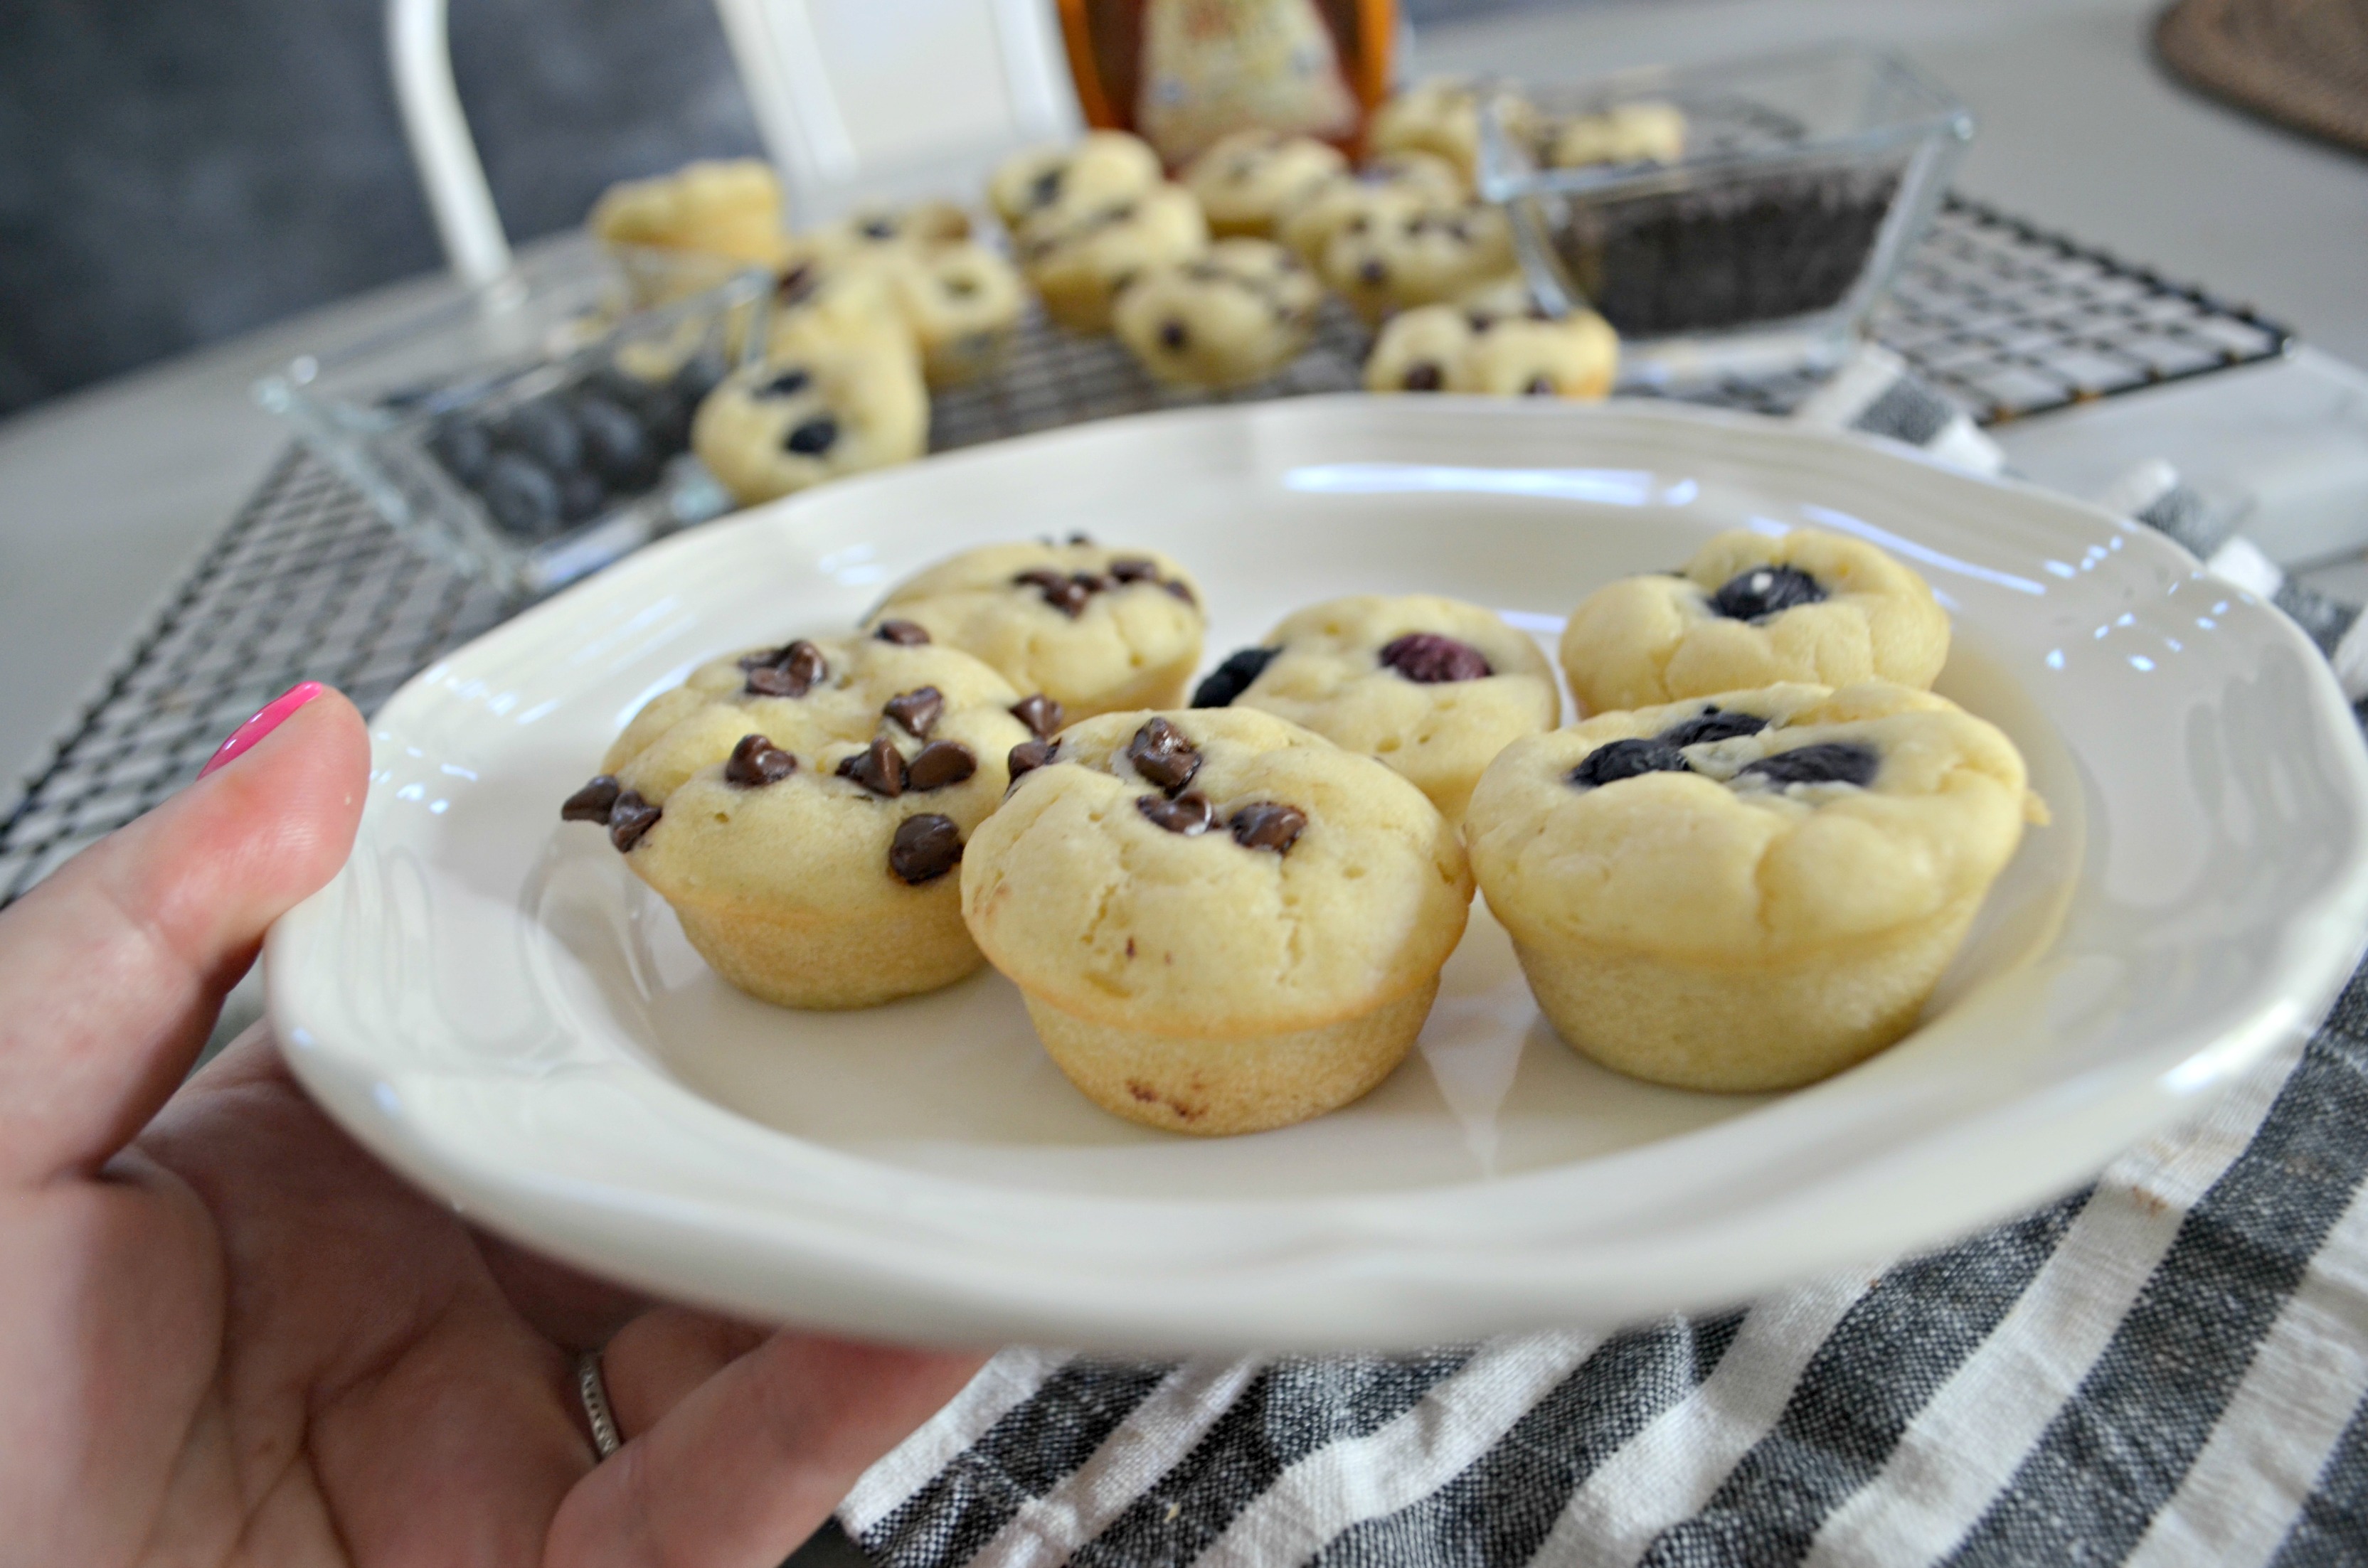 These gluten-free pancake bites are an easy breakfast idea – muffins on a plate